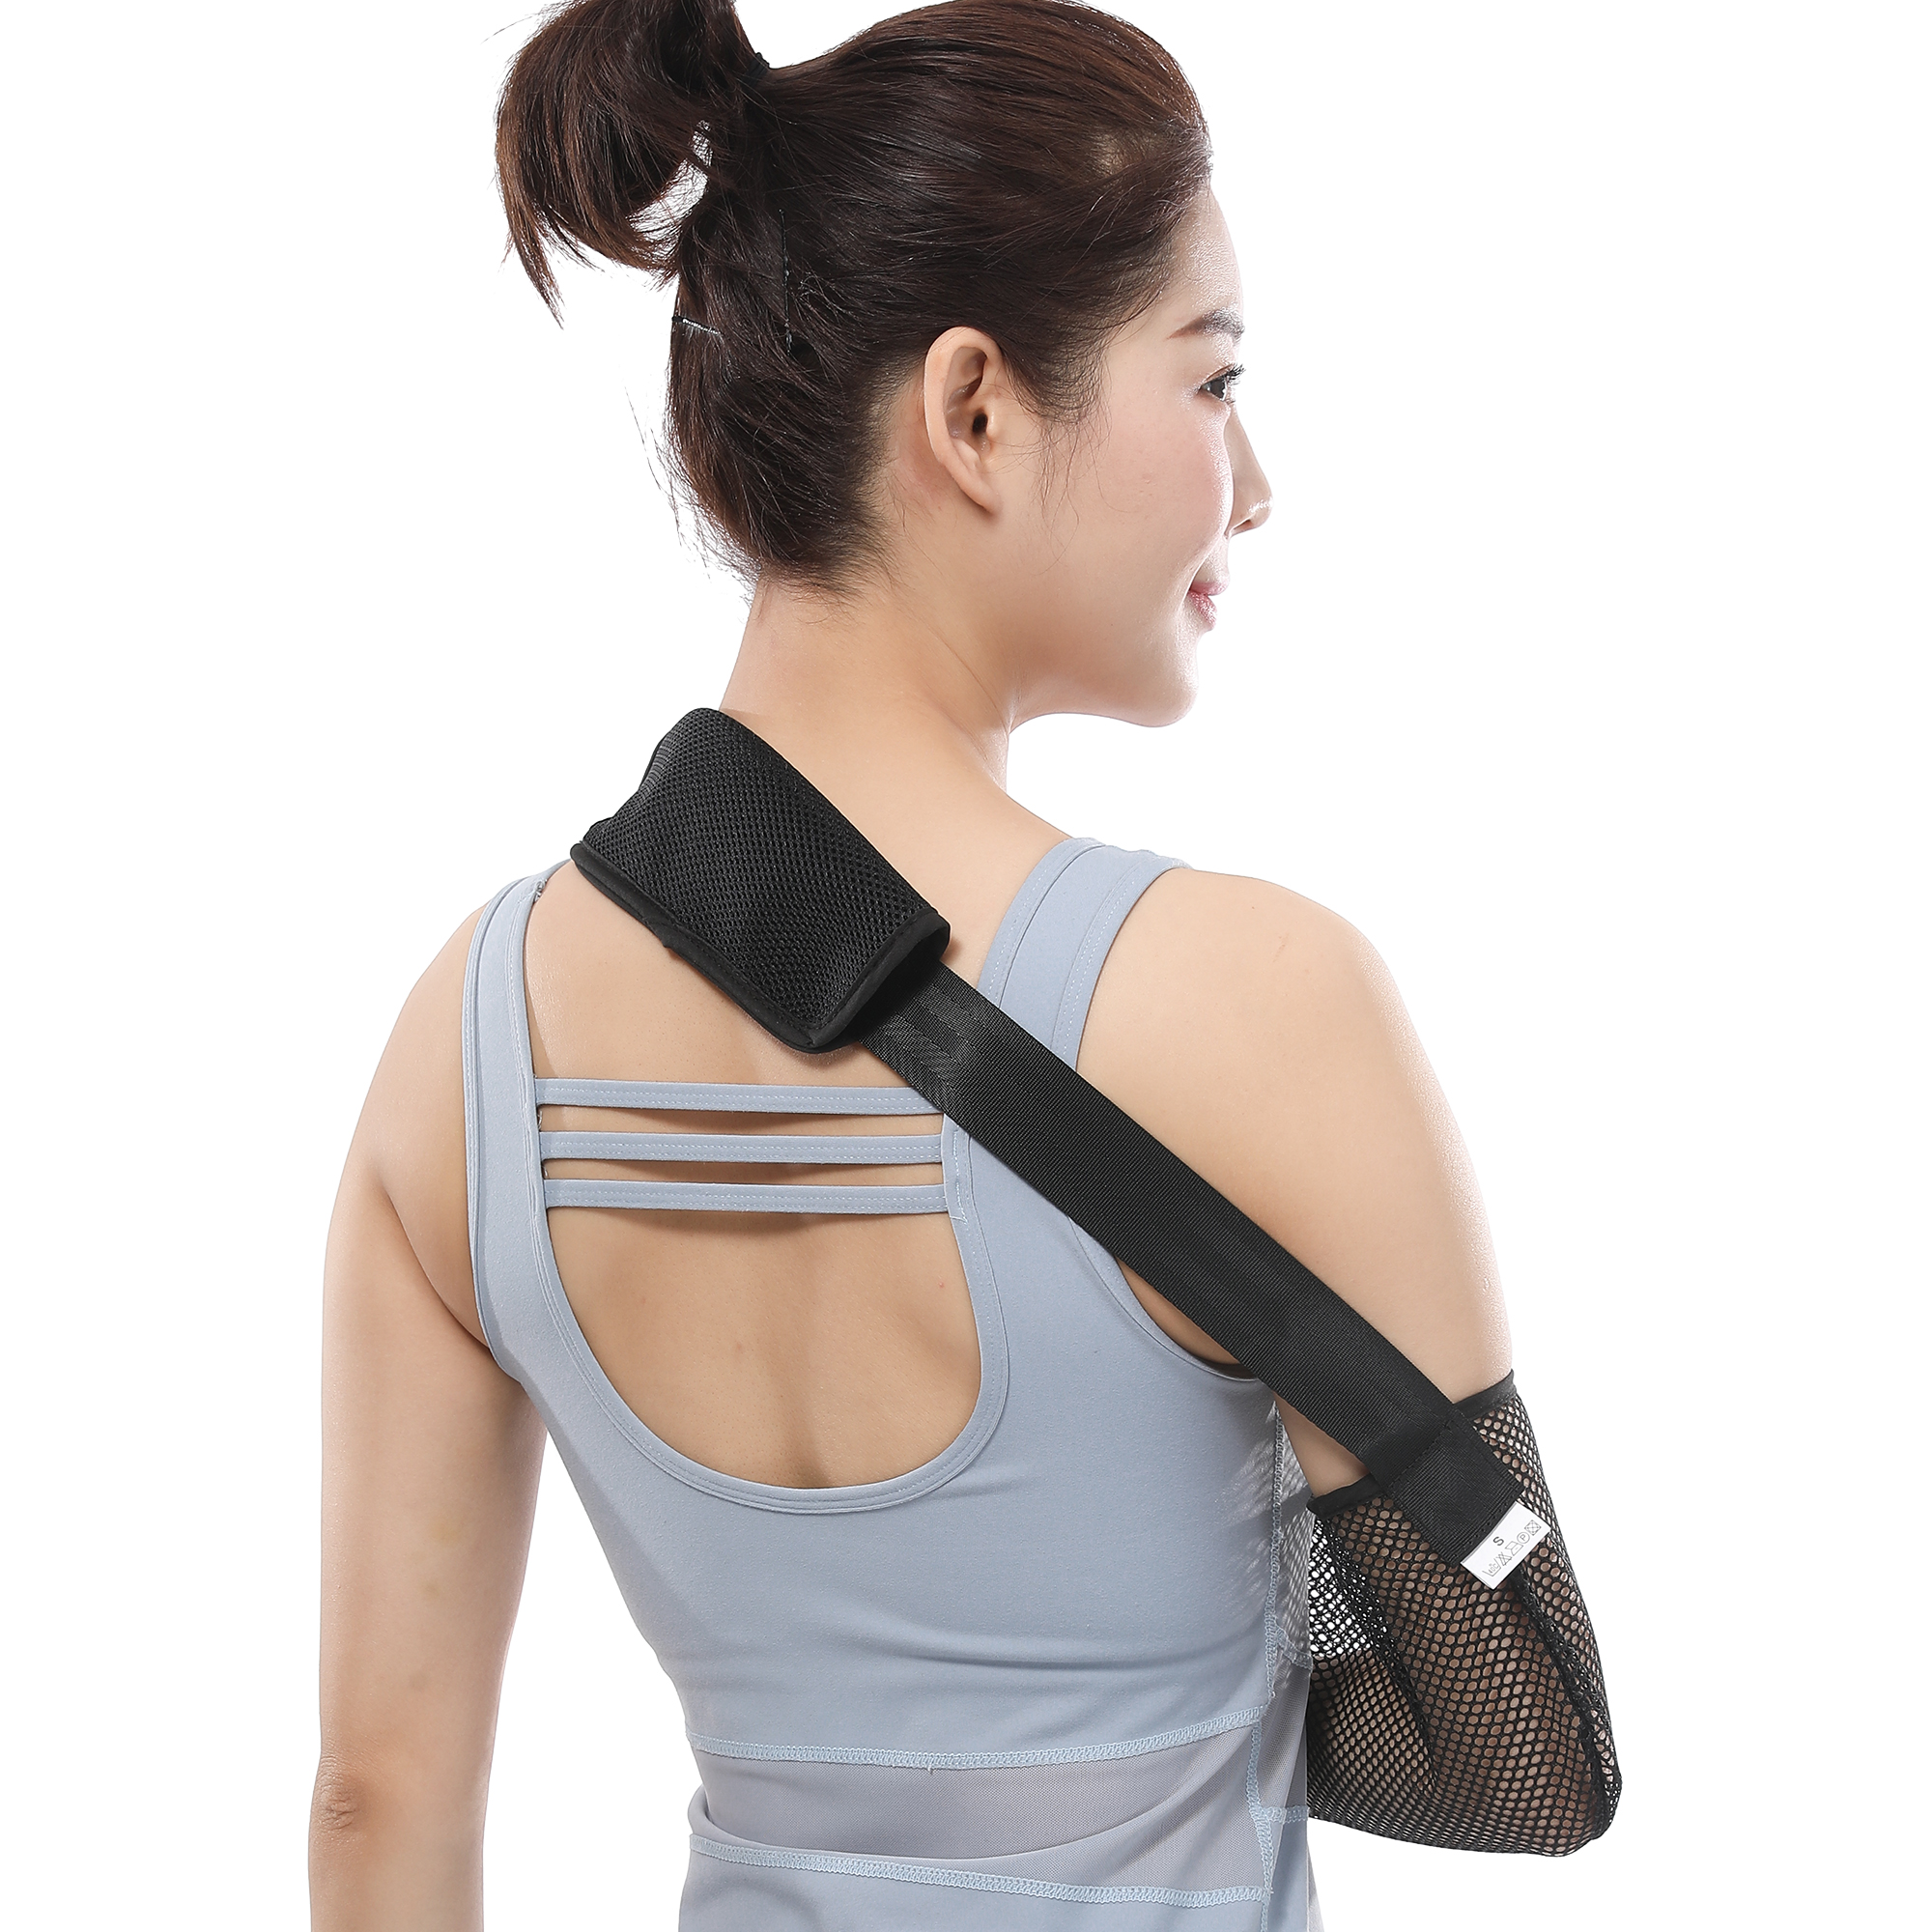 Slouching too much? This posture corrector is on sale for 15% off. | Mashable